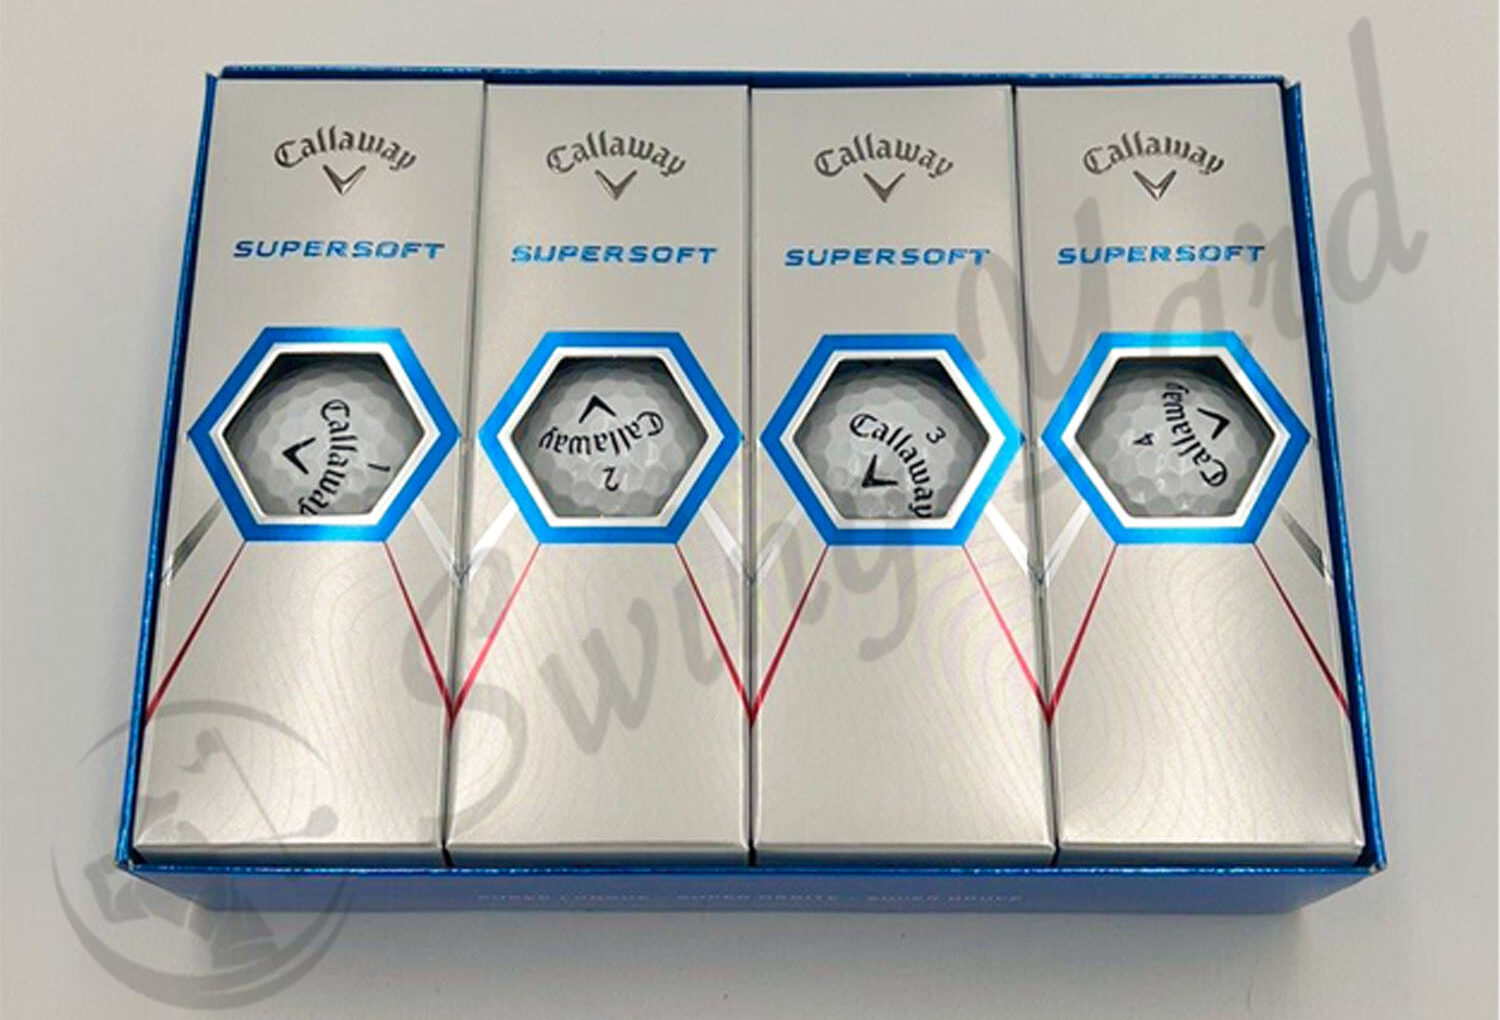 The 4 Supersoft single packs inside the box from Callaway